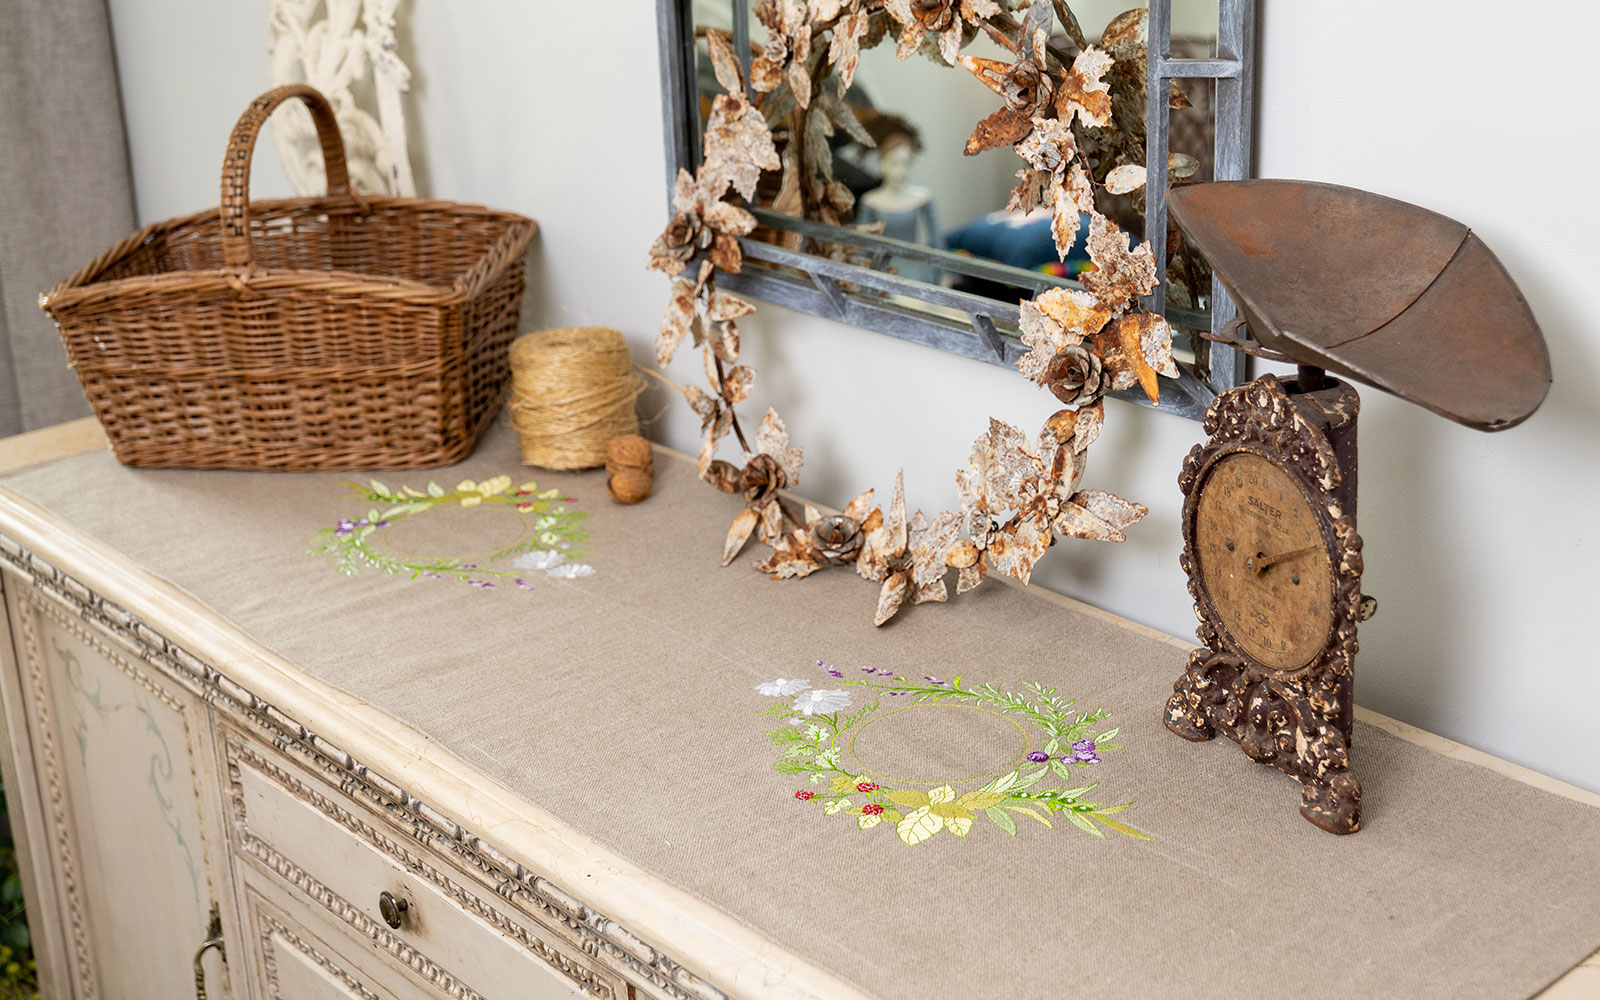 brown floral embroidered table runner on top of wooden sideboard